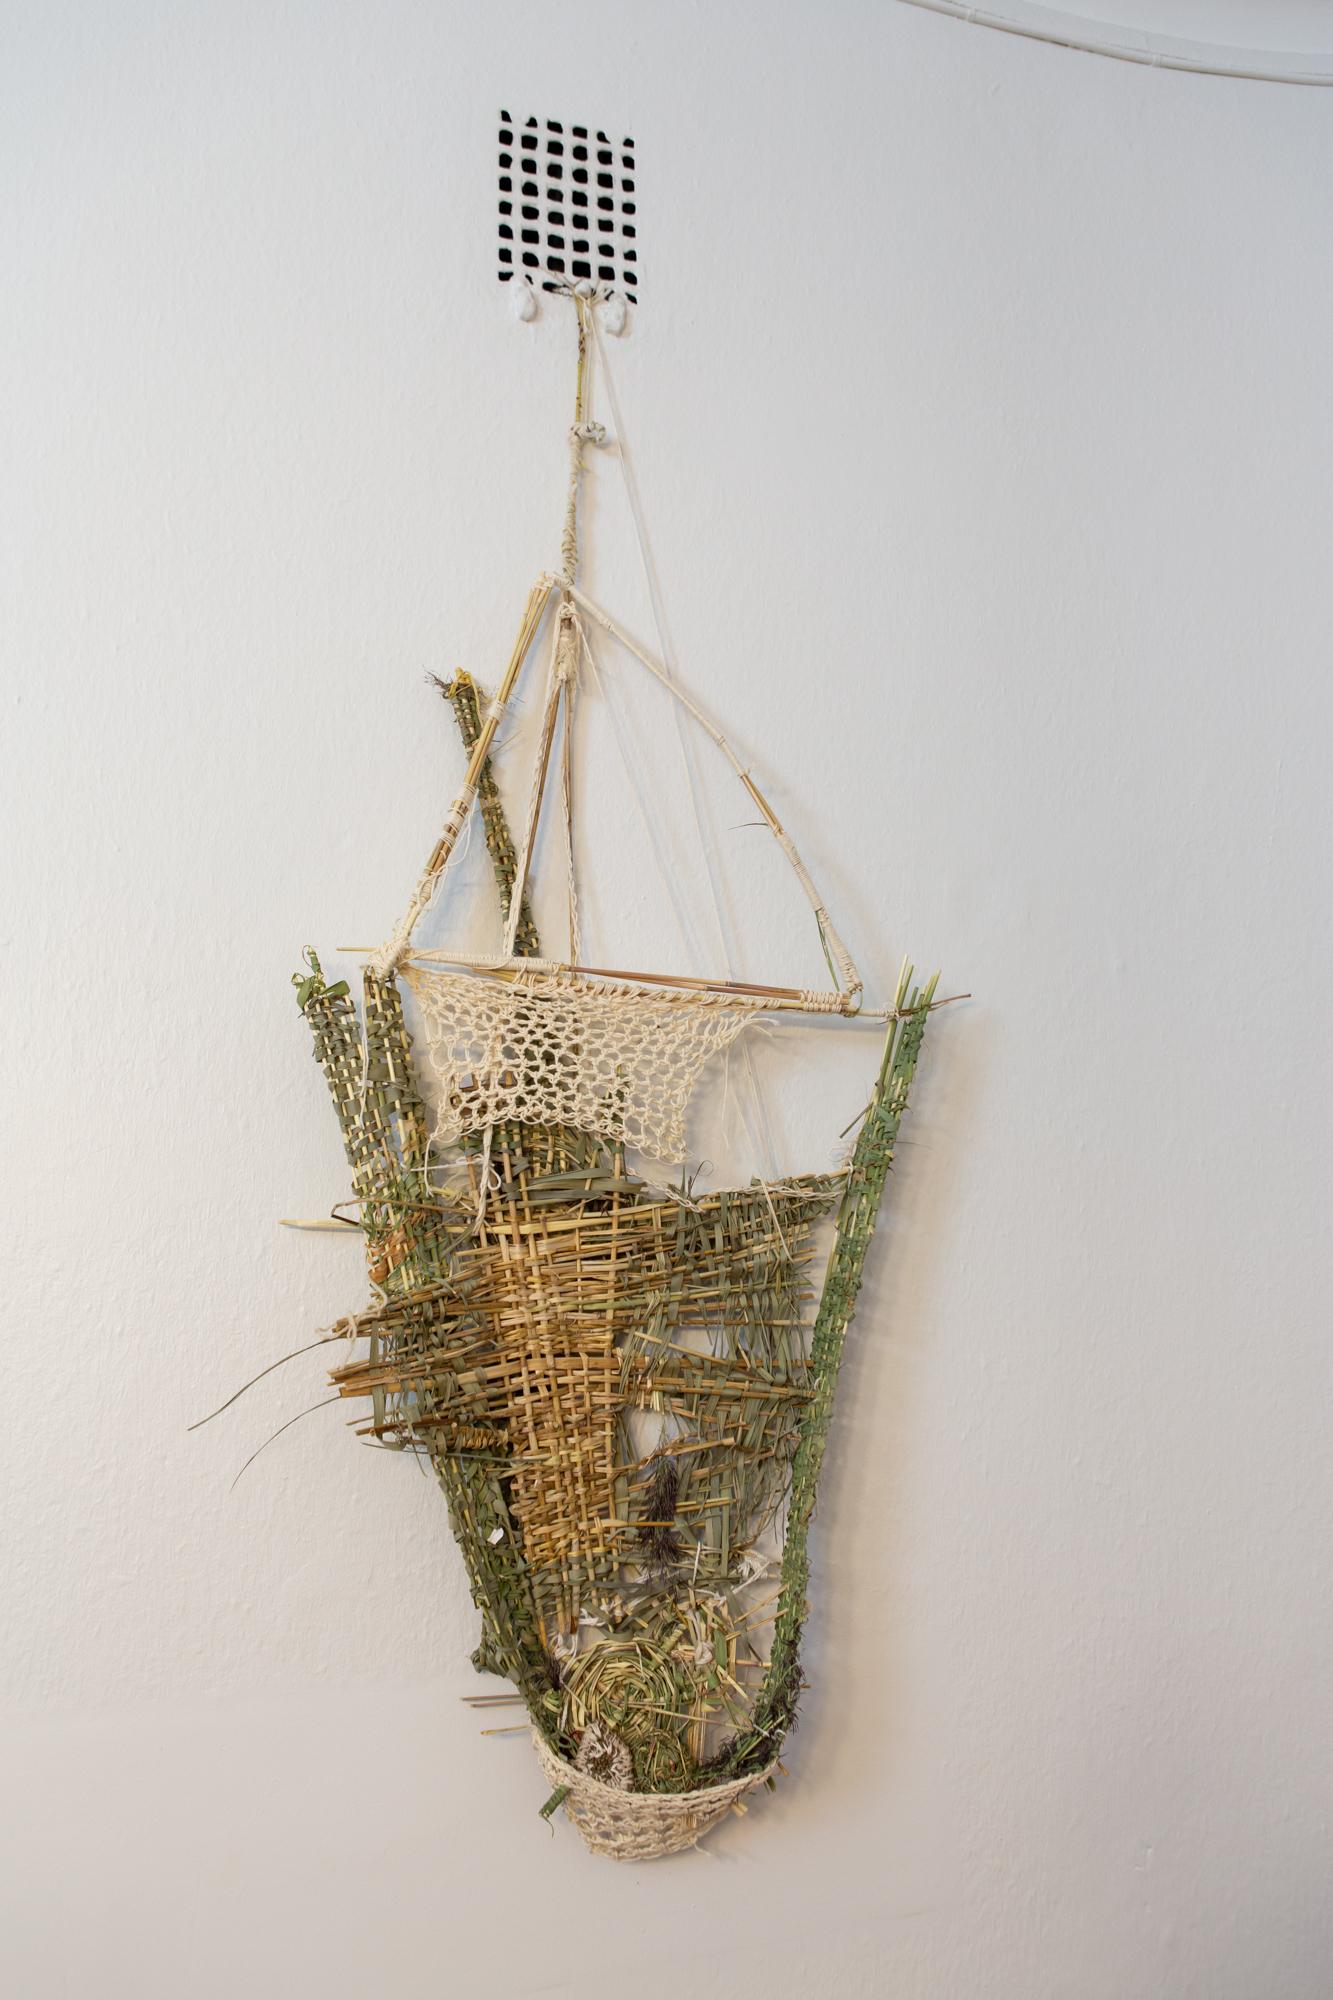 Artwork Seven Recipients at the frame office, consisting of sticks and strings woven together to form a roughly shaped triangular basket-like object, is hung on a white wall.